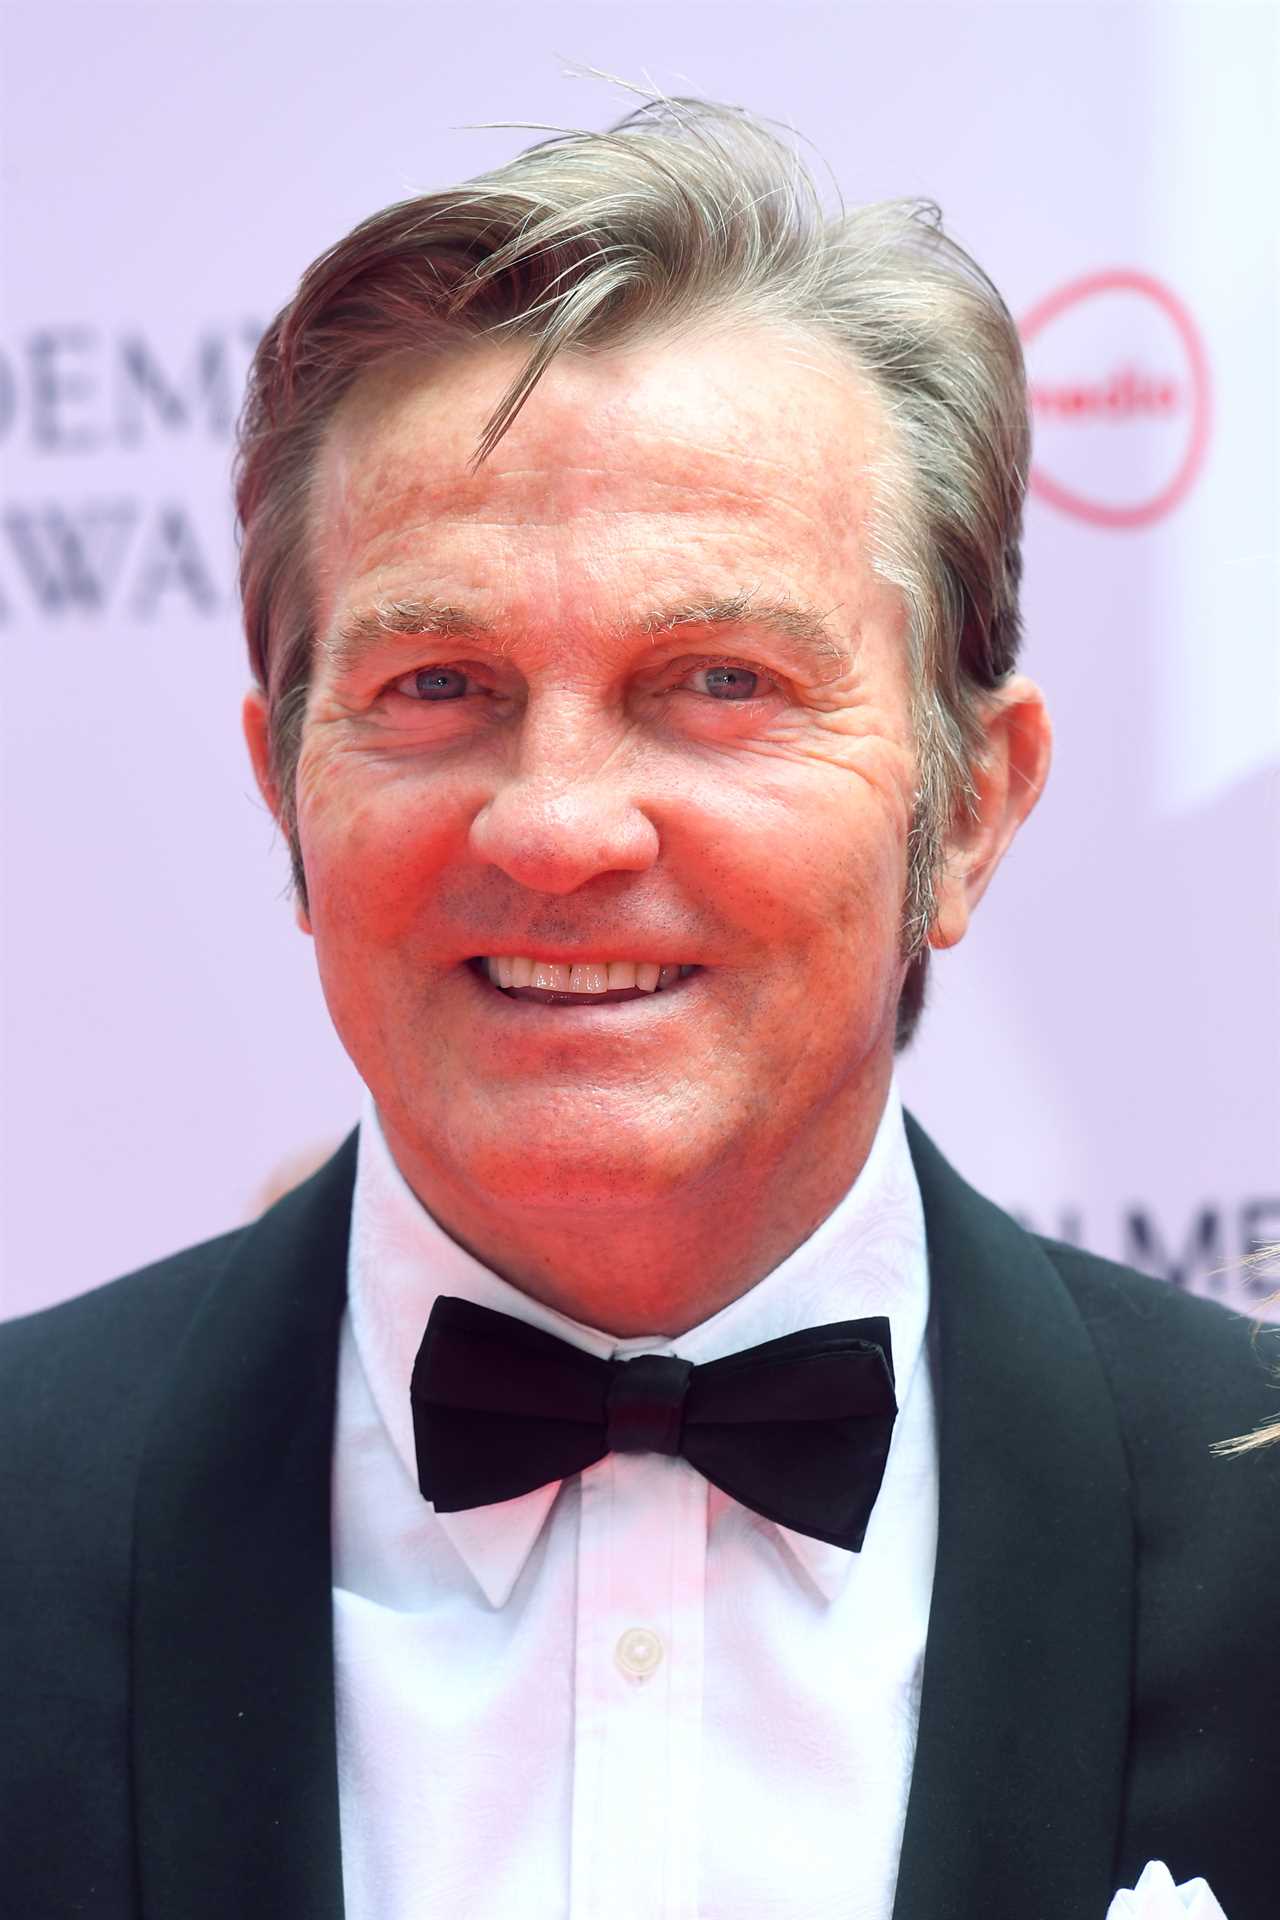 Bradley Walsh fans shocked as he reveals super star pals he’s known since he was a kid in new documentary